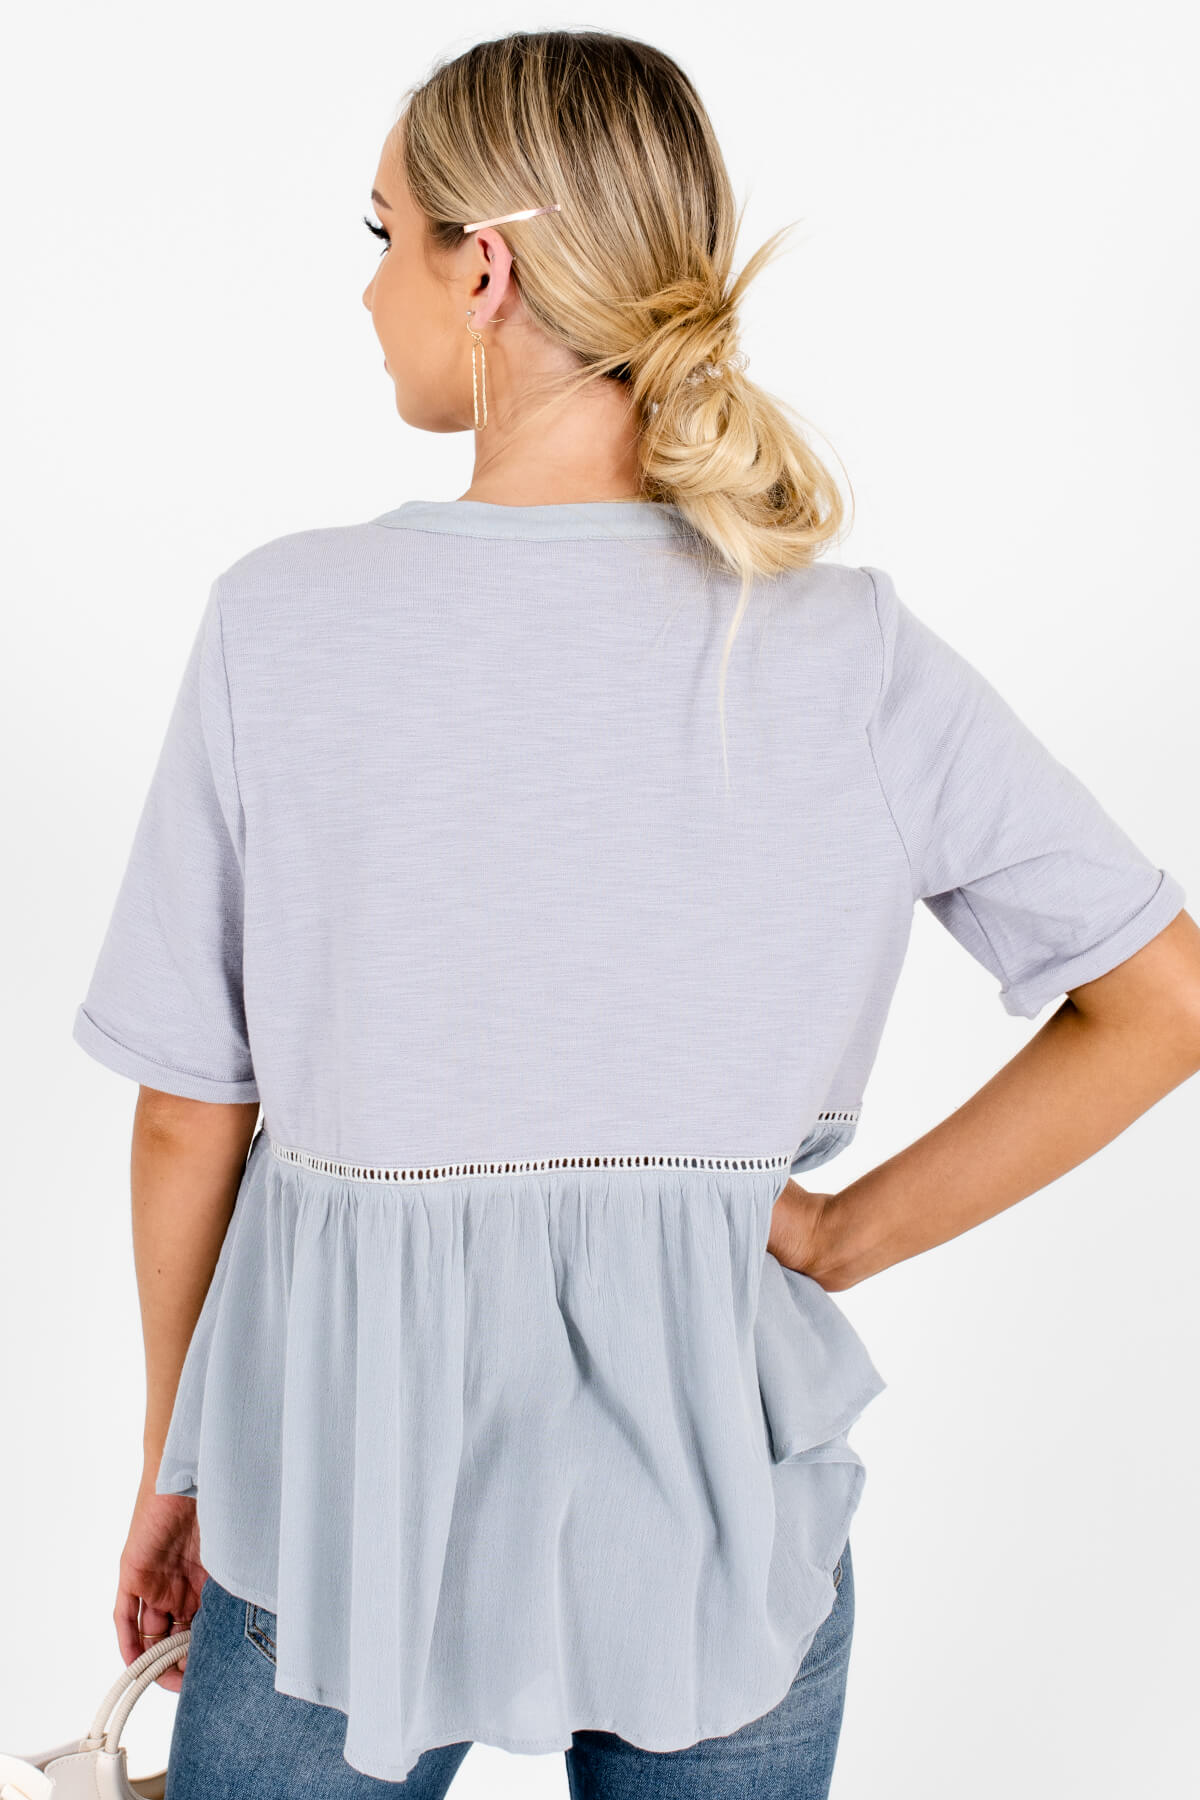 Blue-Gray Cute Button Up Tops Affordable Online Boutique